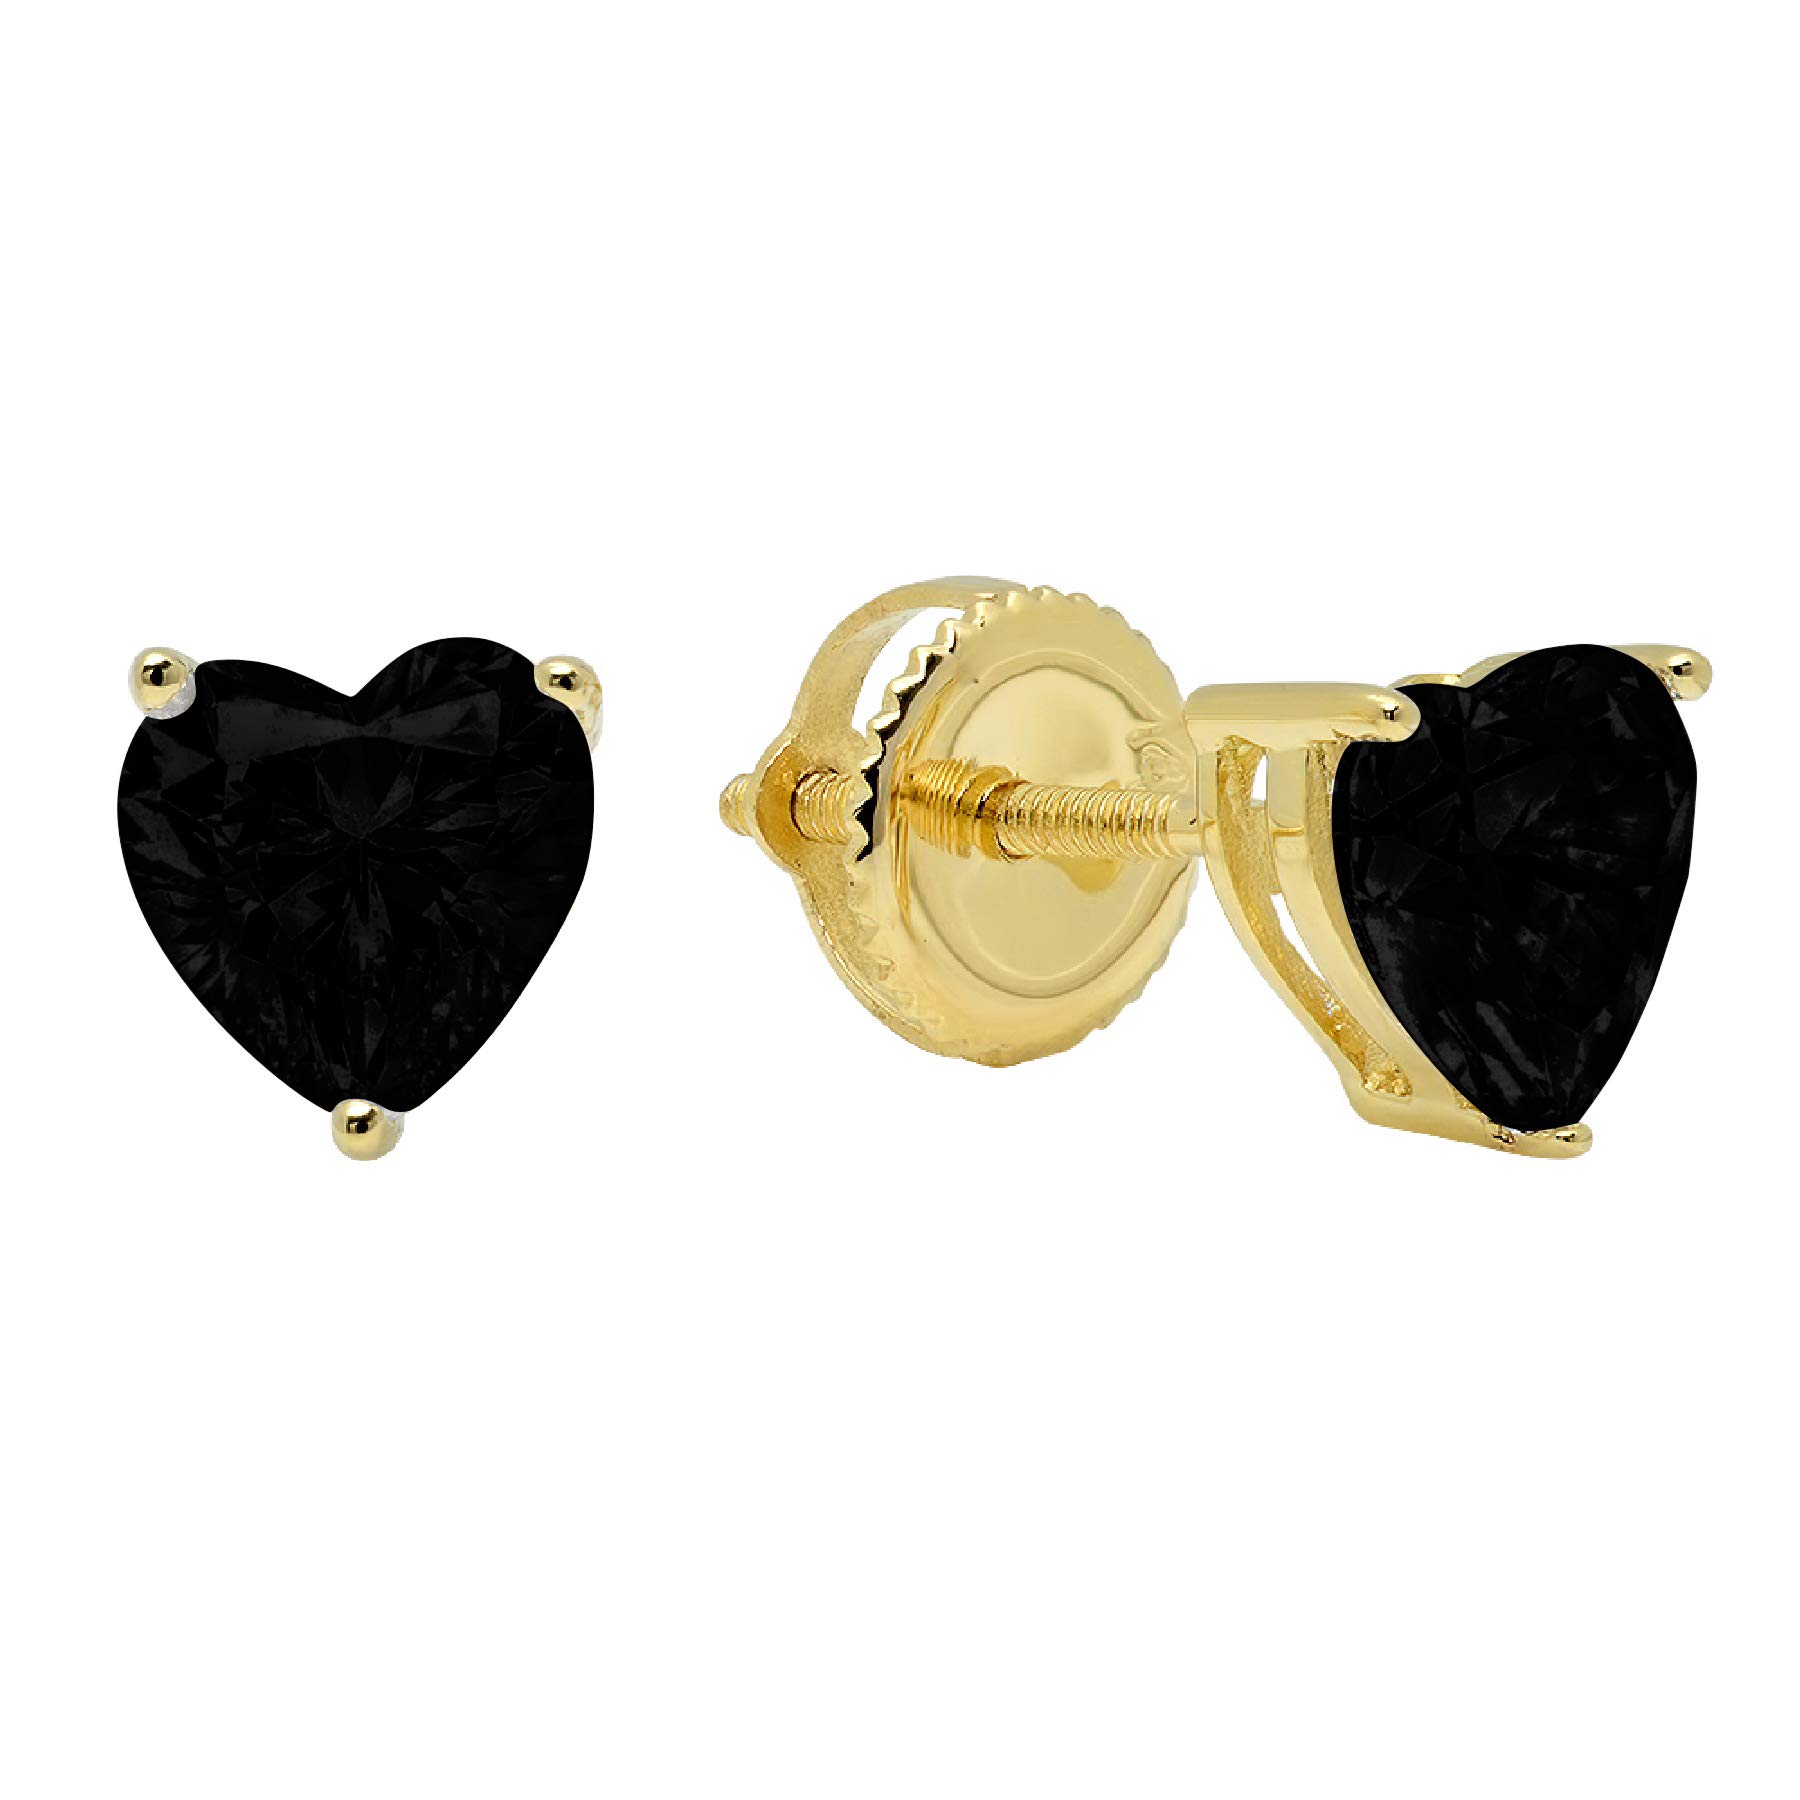 Clara Pucci 1.1 ct Brilliant Heart Cut Solitaire VVS1 Fine Natural Black Onyx Gemstone Pair of Stud Earrings Solid 18K Yellow Gold Screw Back